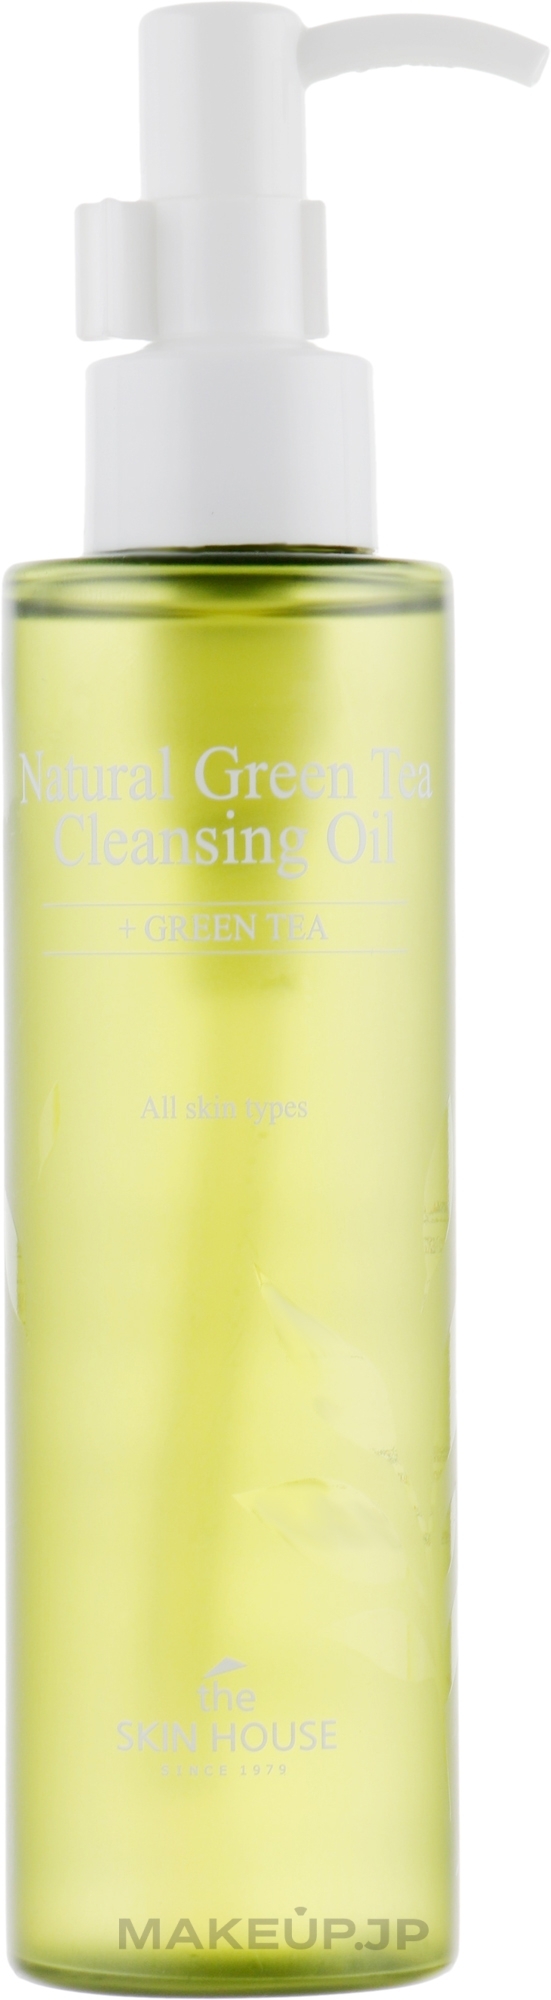 Green Tea Hydrophilic Oil - The Skin House Natural Green Tea Cleansing Oil — photo 150 ml